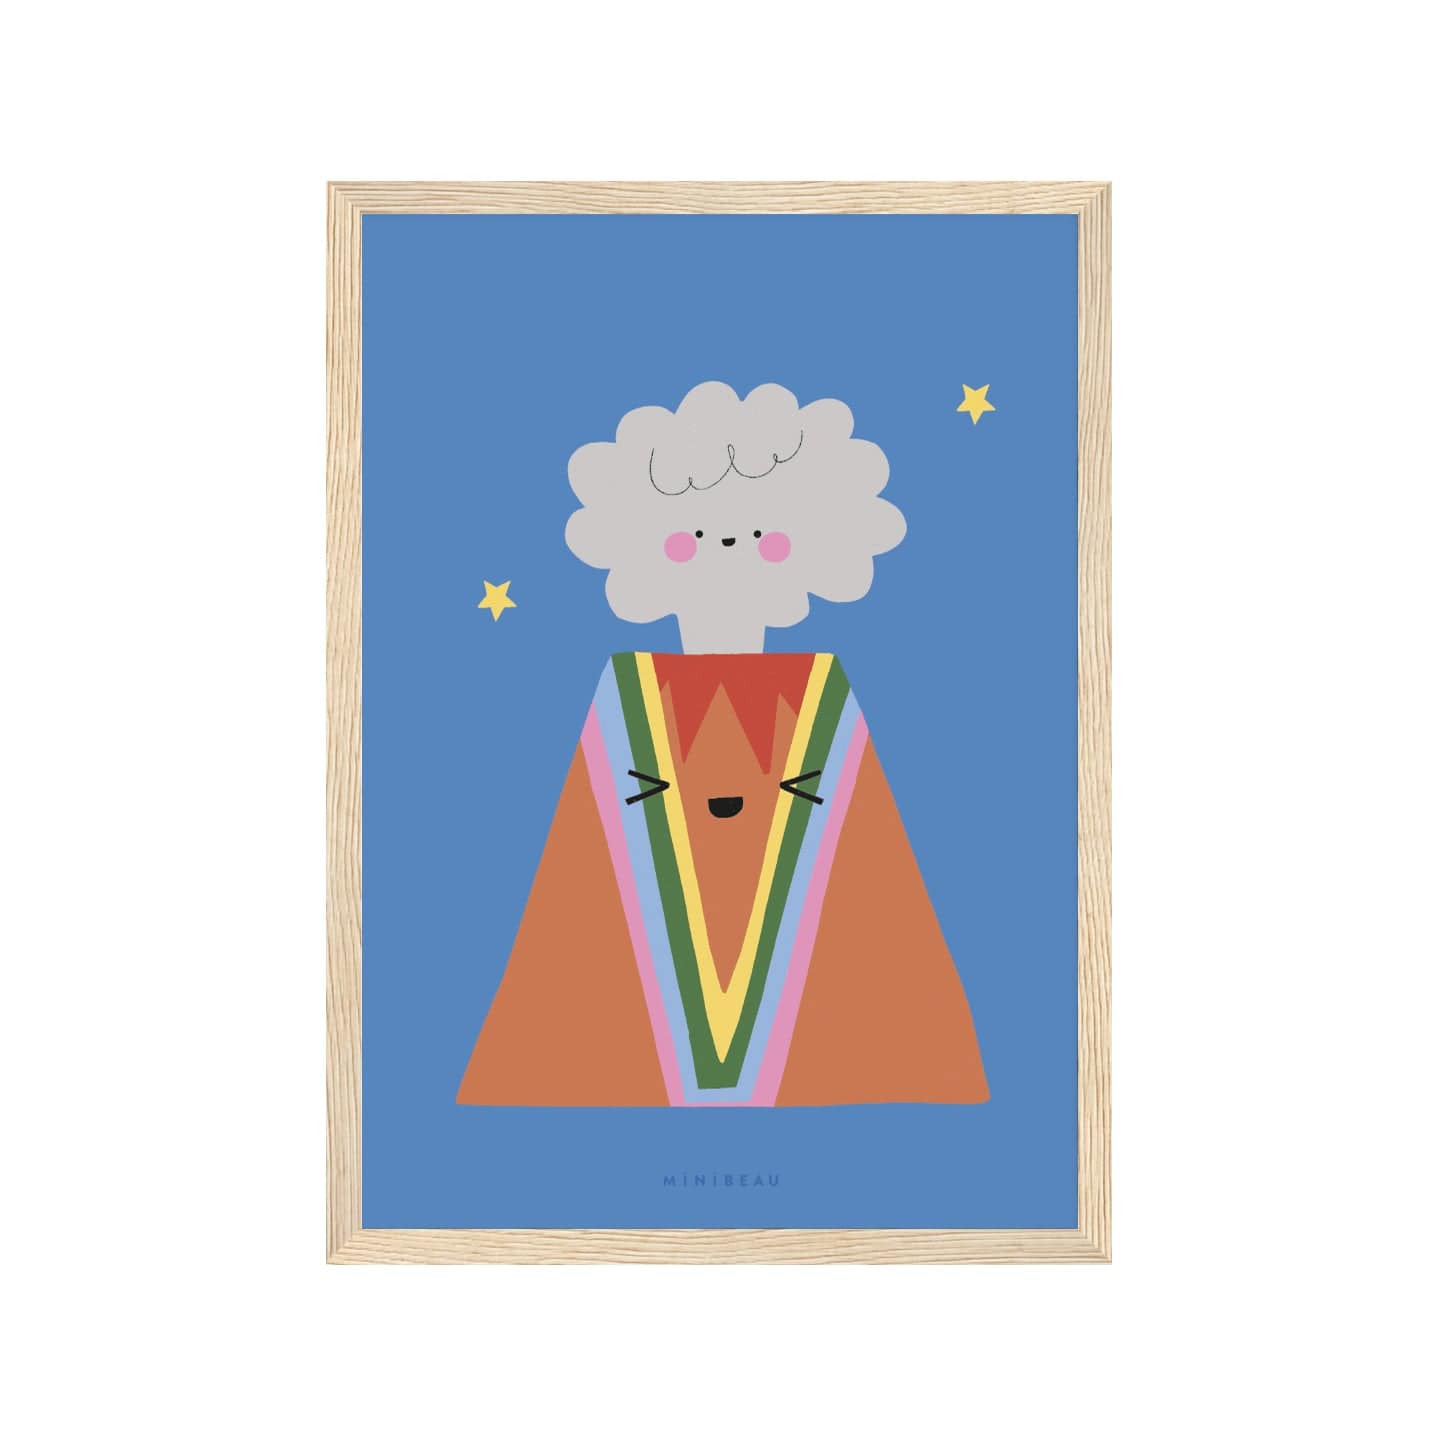 Art print in a light wood frame. Our Happy Alphabet 'V' Art Print shows an erupting volcanow with a smiling plume of smoke and the lava in rainbow colours running down the volcano, forming a V on a blue background with stars.